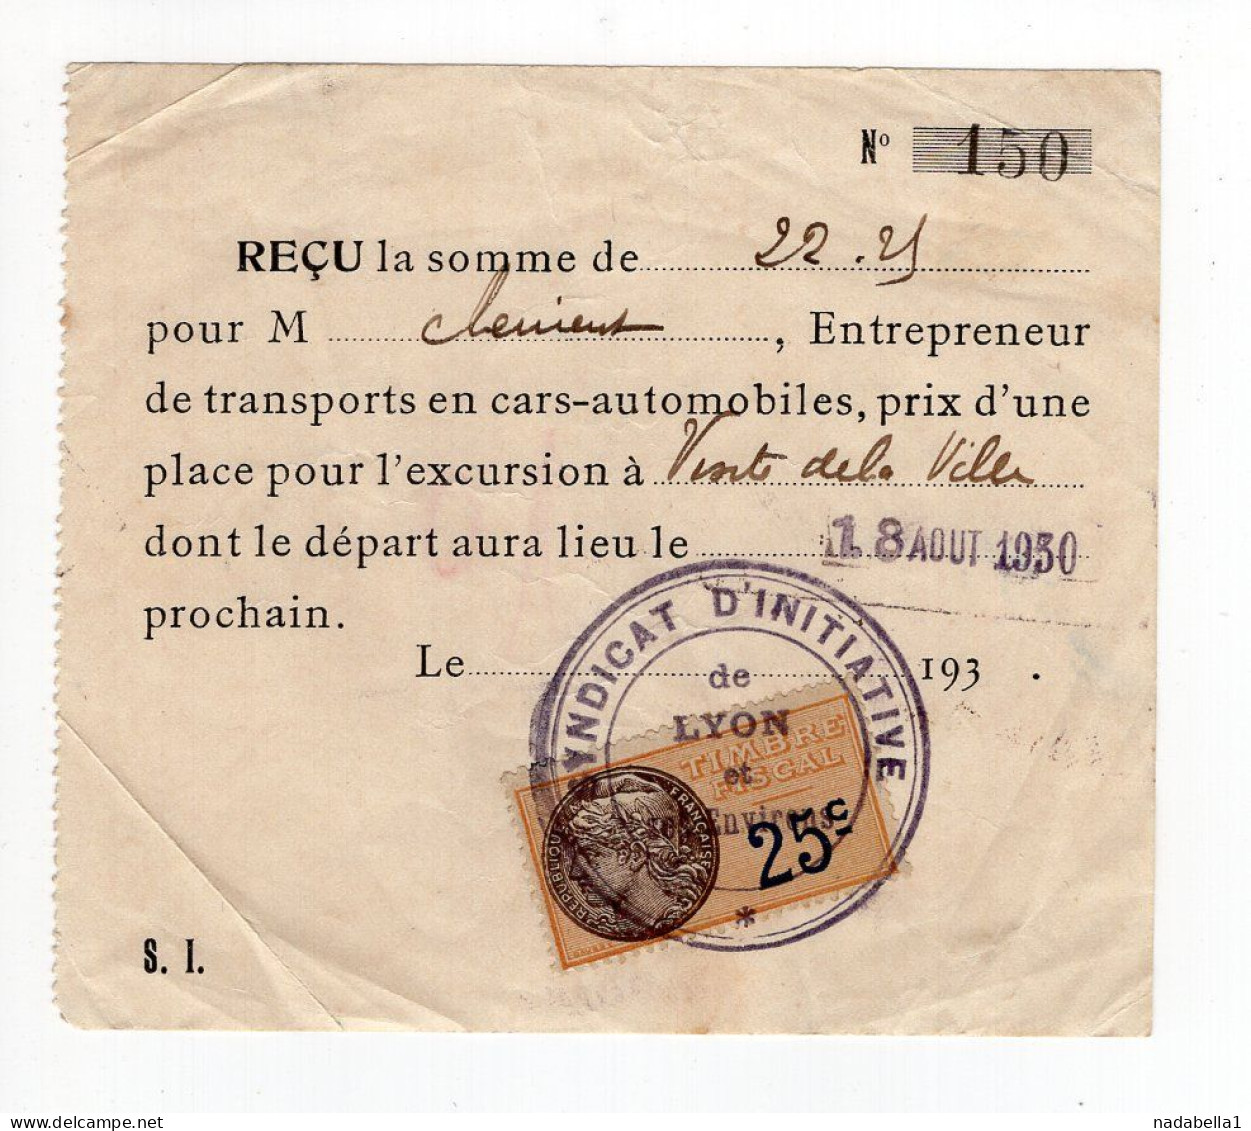 1930. FRANCE,LYON,25 C REVENUE STAMP,ENTRY TICKET - Covers & Documents